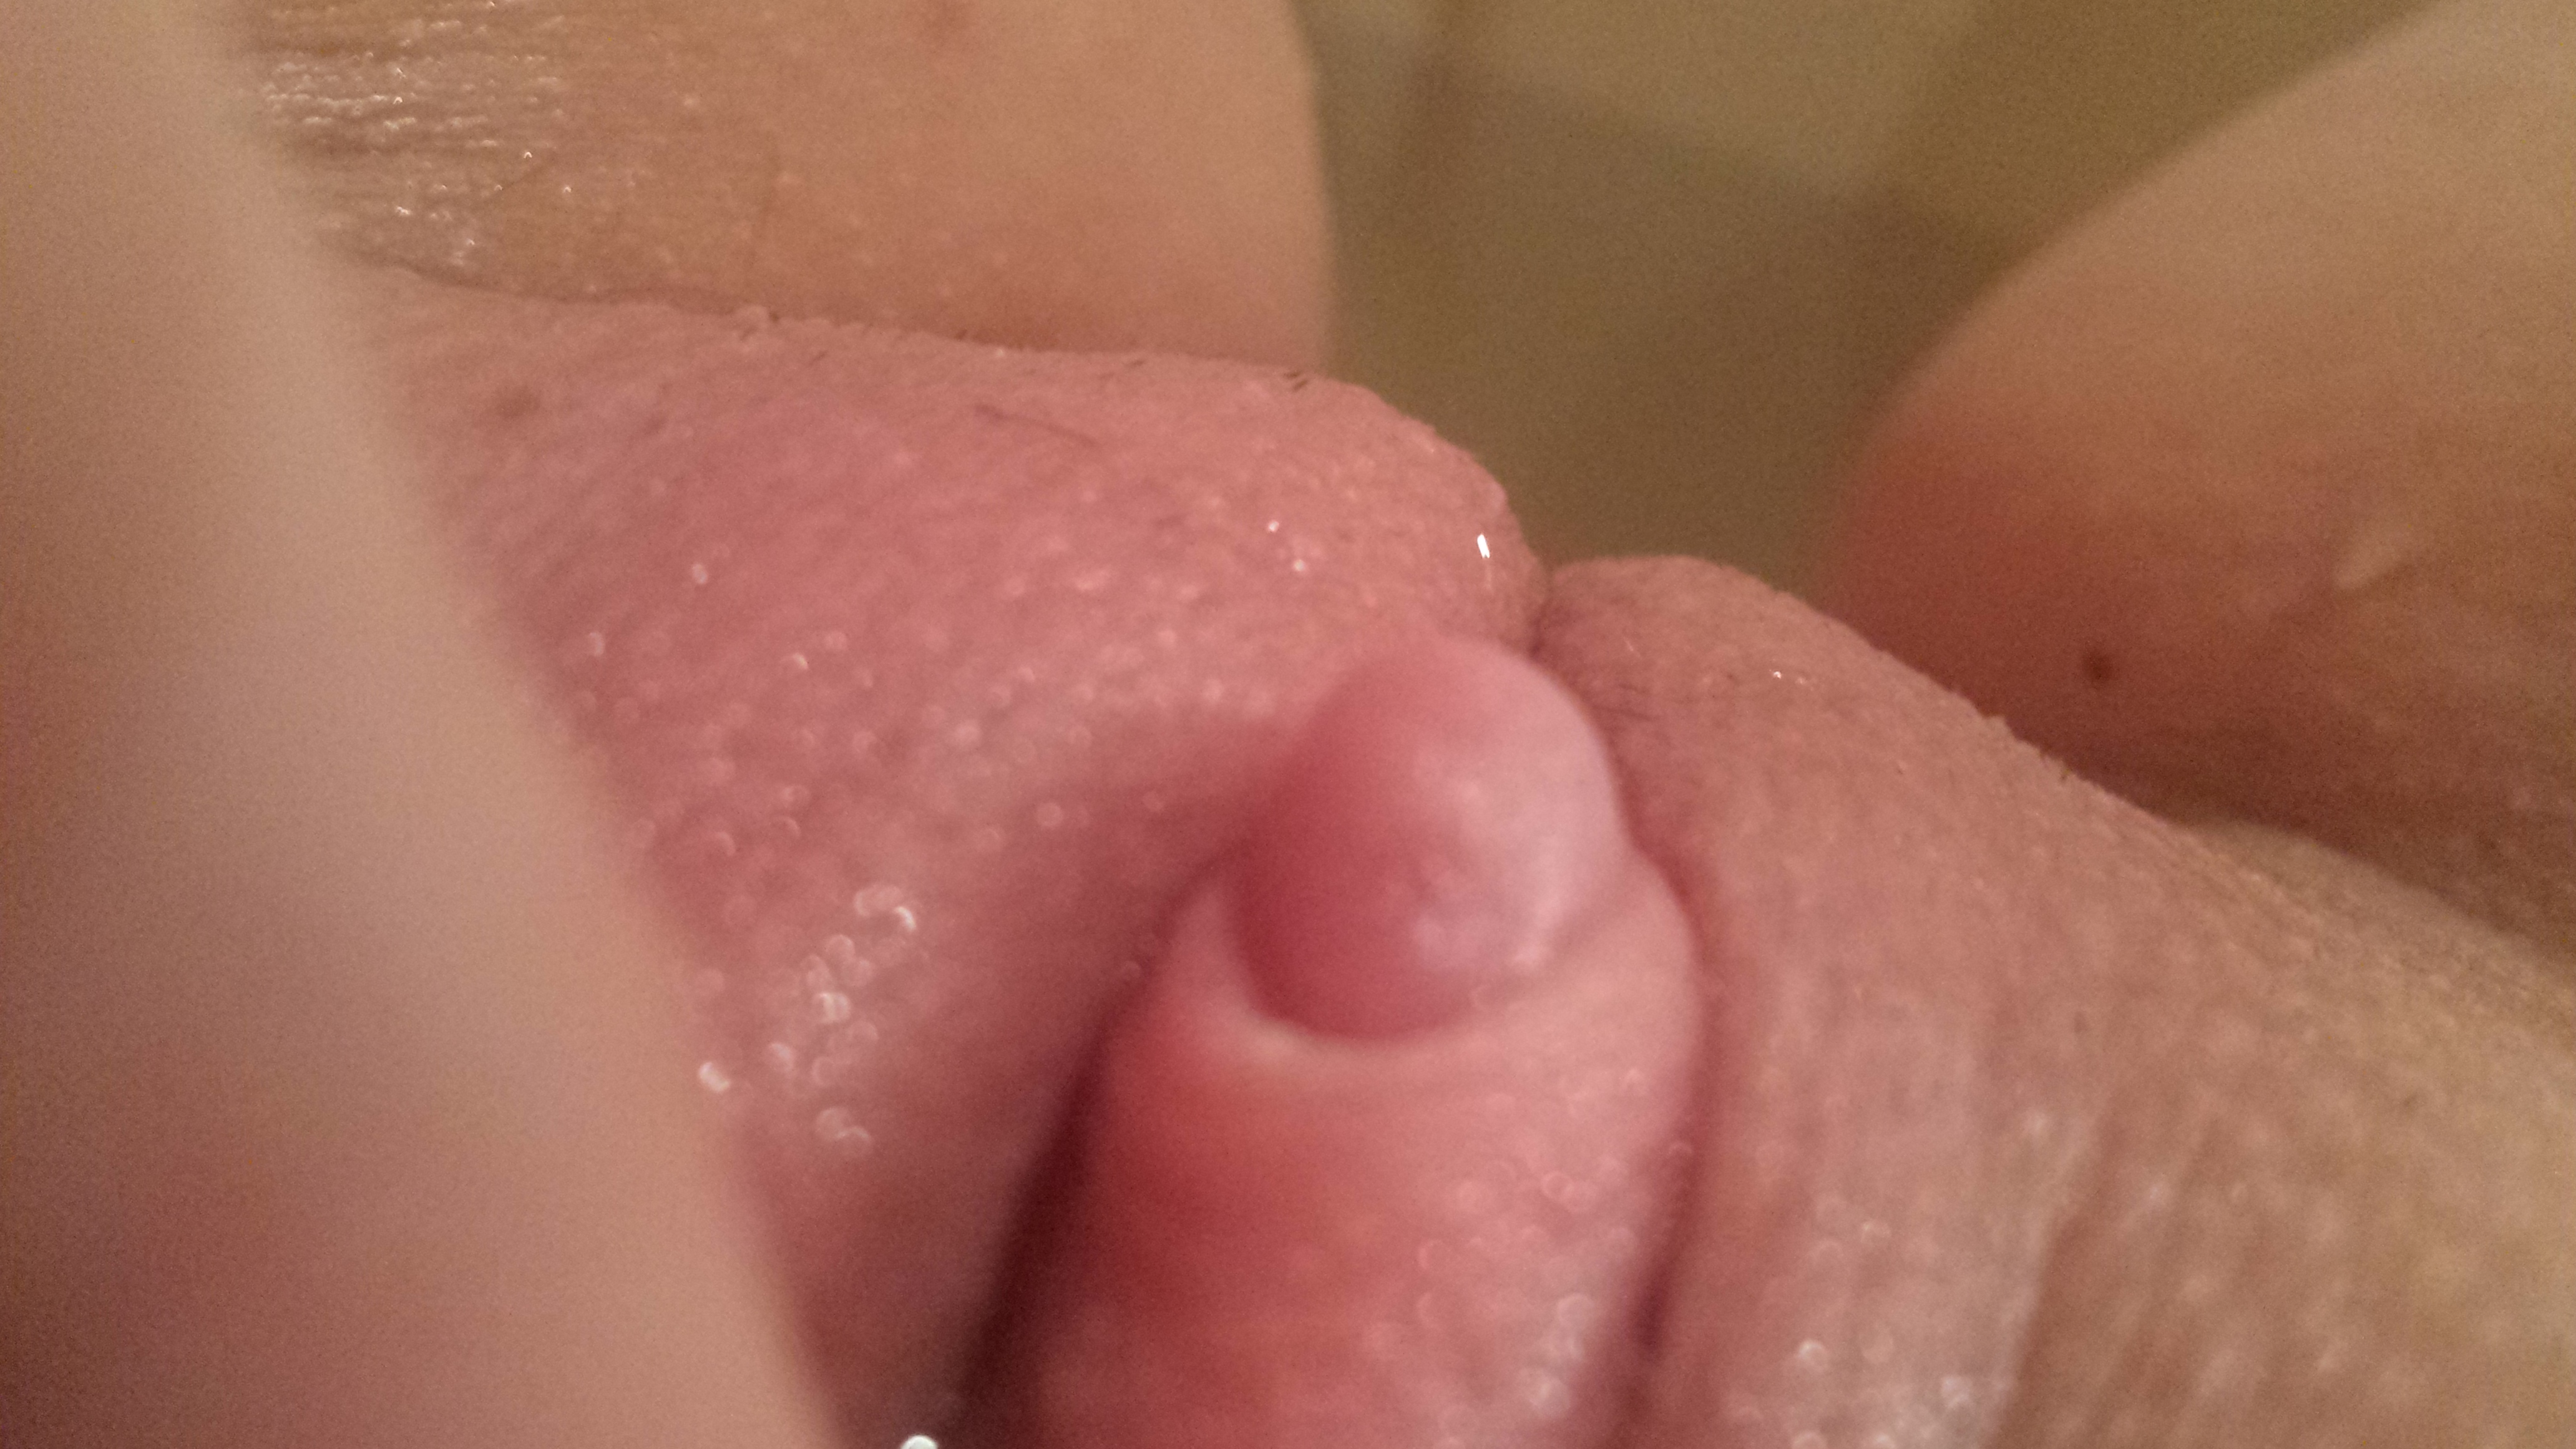 How do you like my clit? Porn Pic - EPORNER